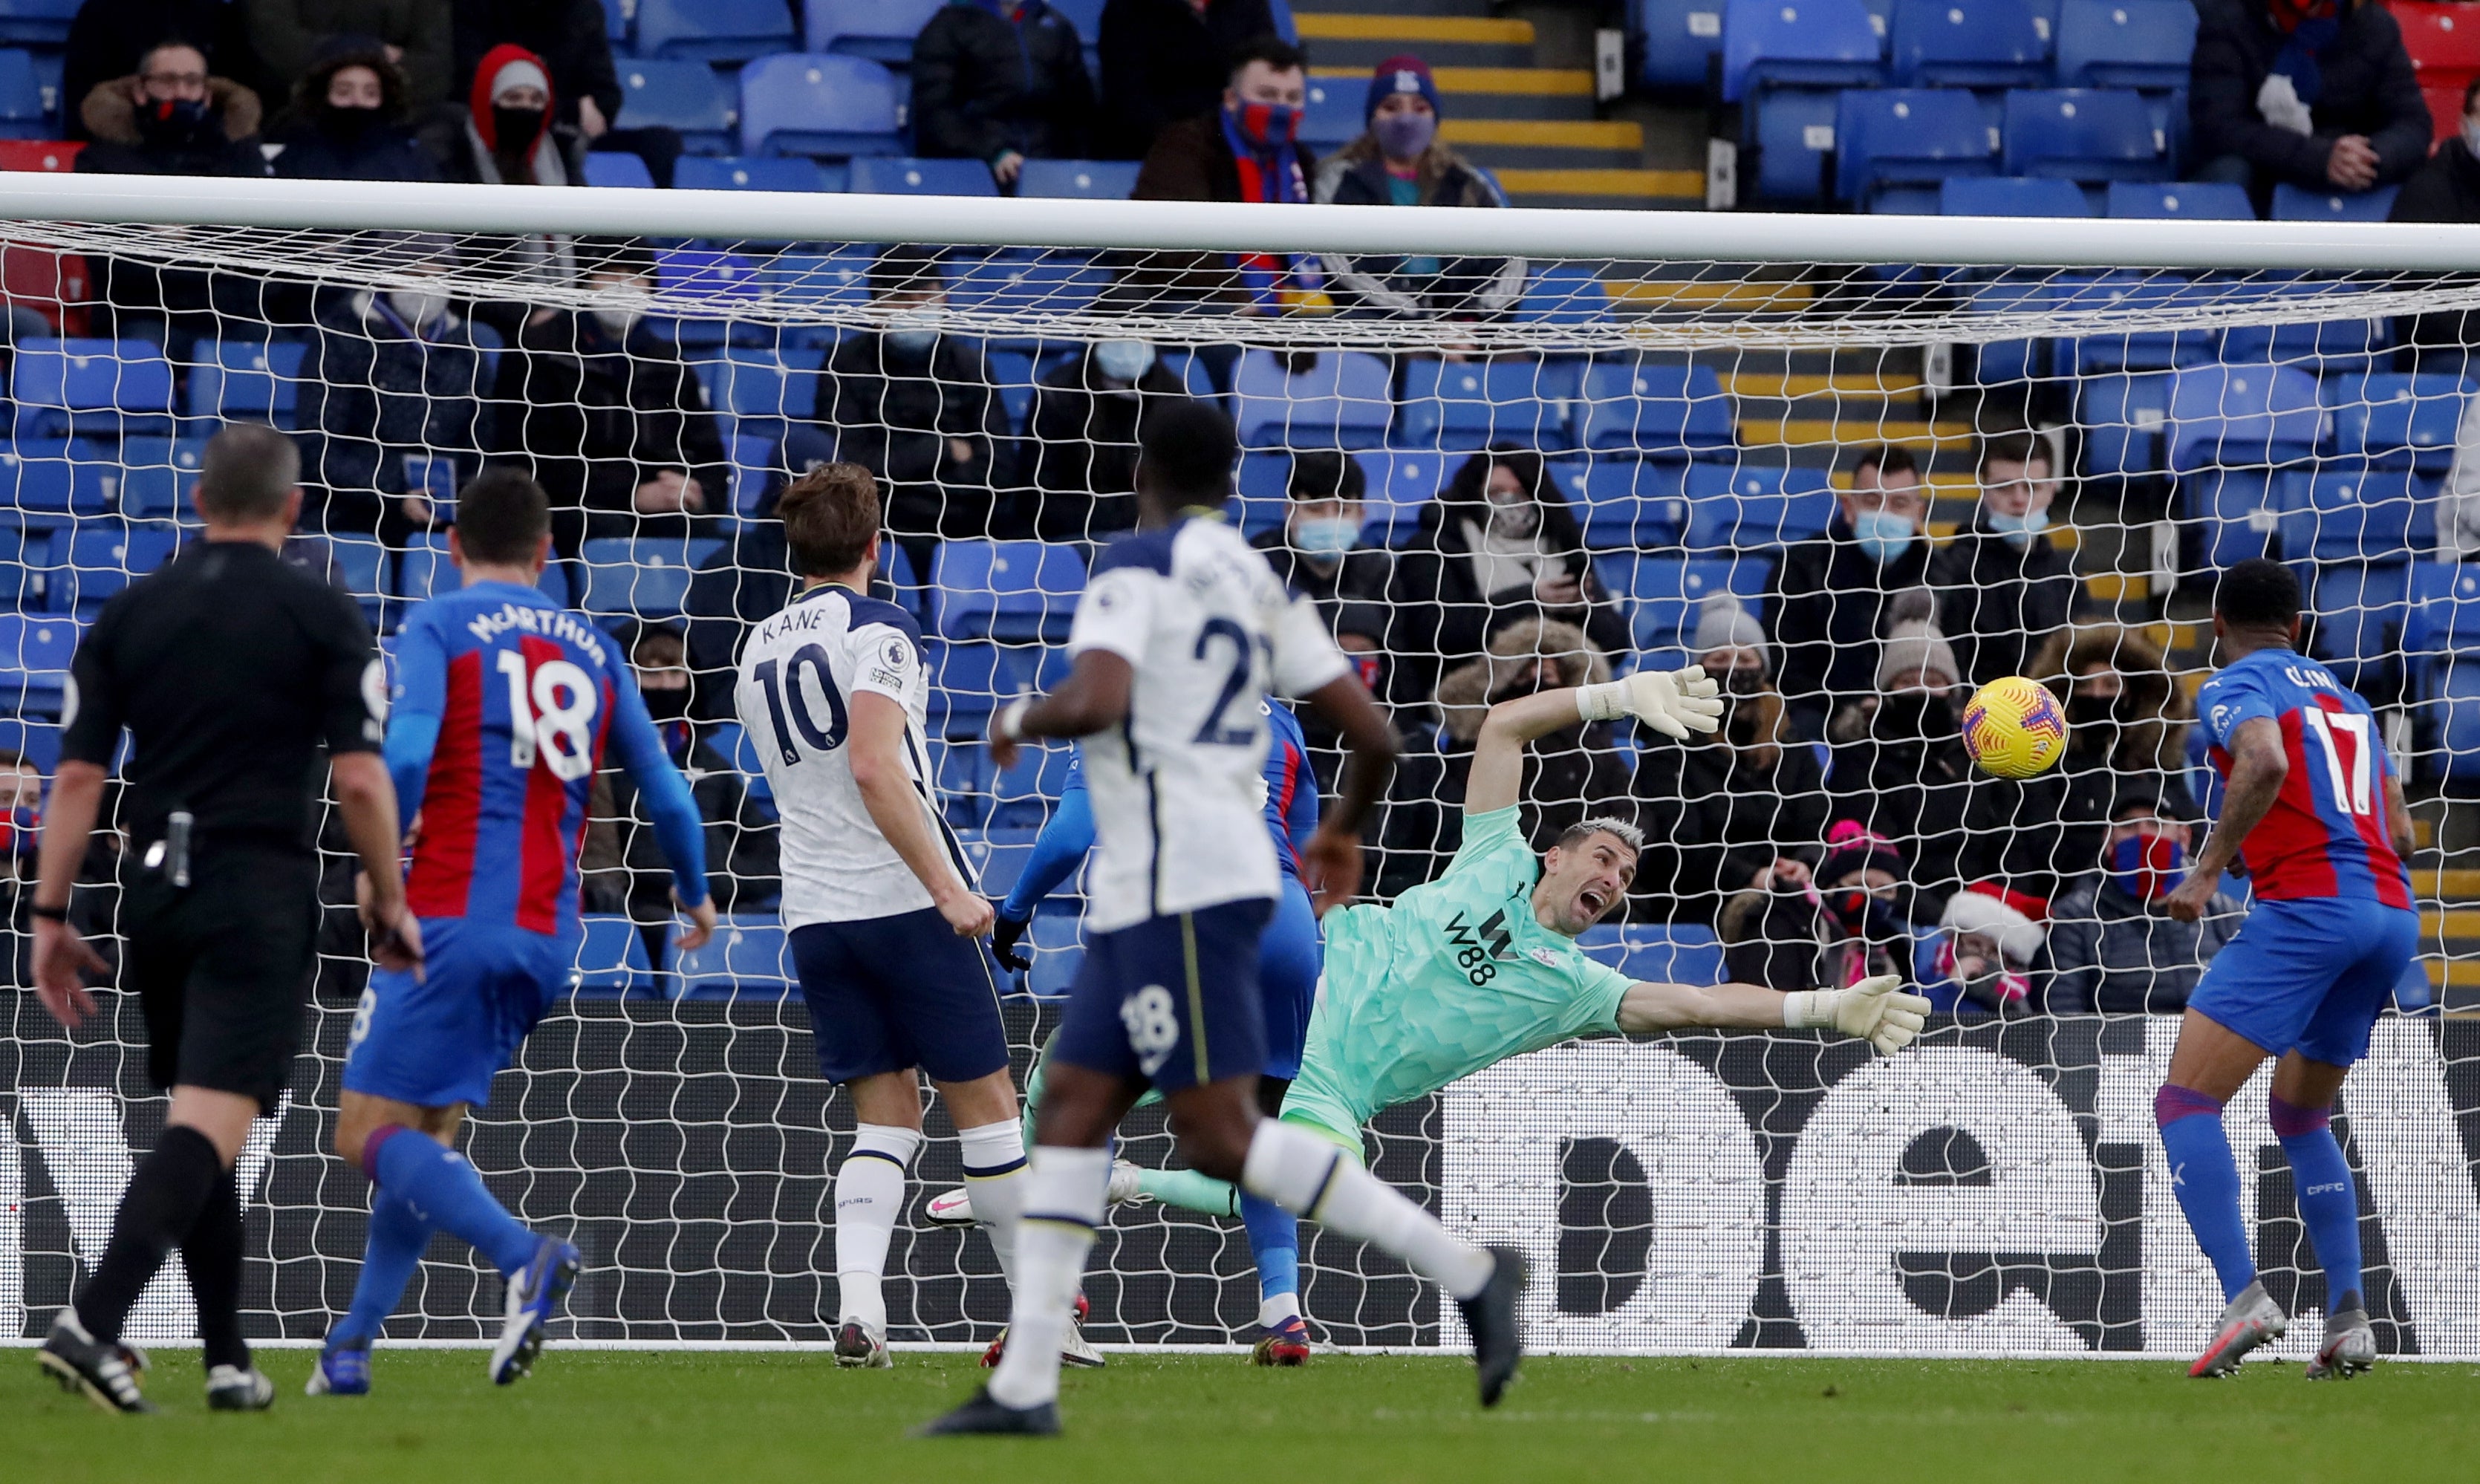 Vicente Guaita pulled off several saves to deny Spurs